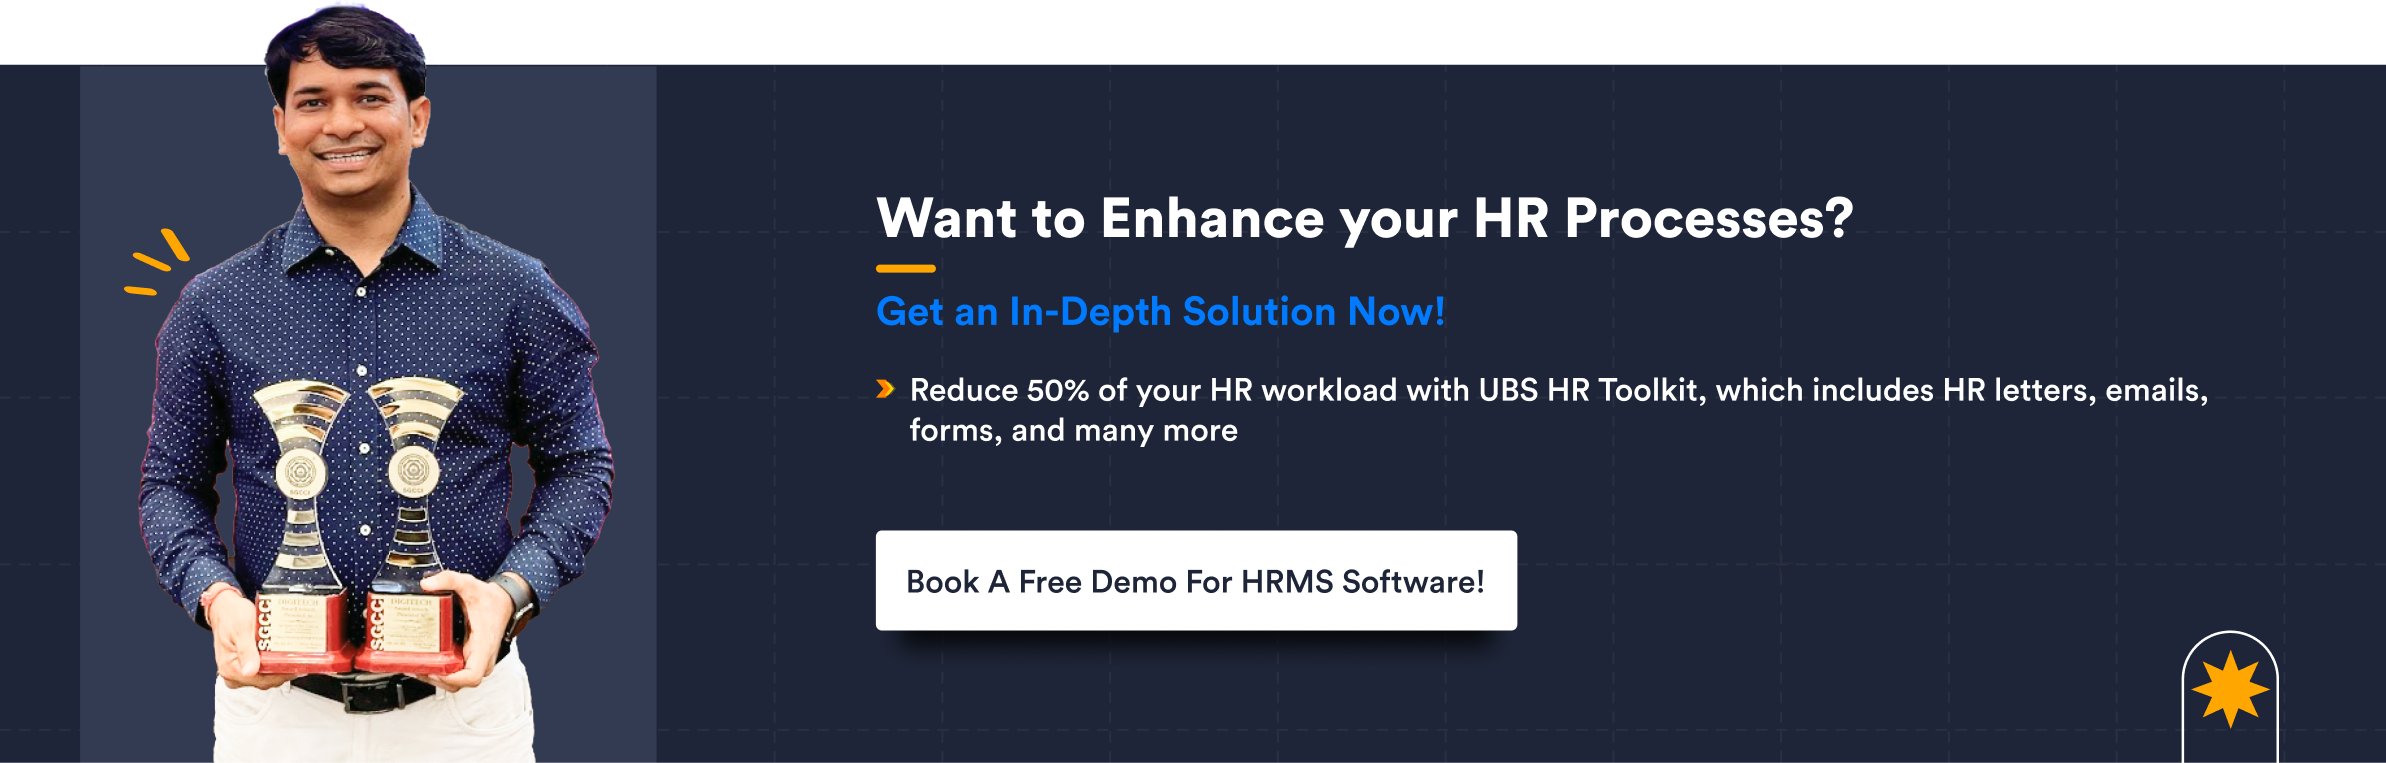 Want to Enhance your HR Processes 2 1